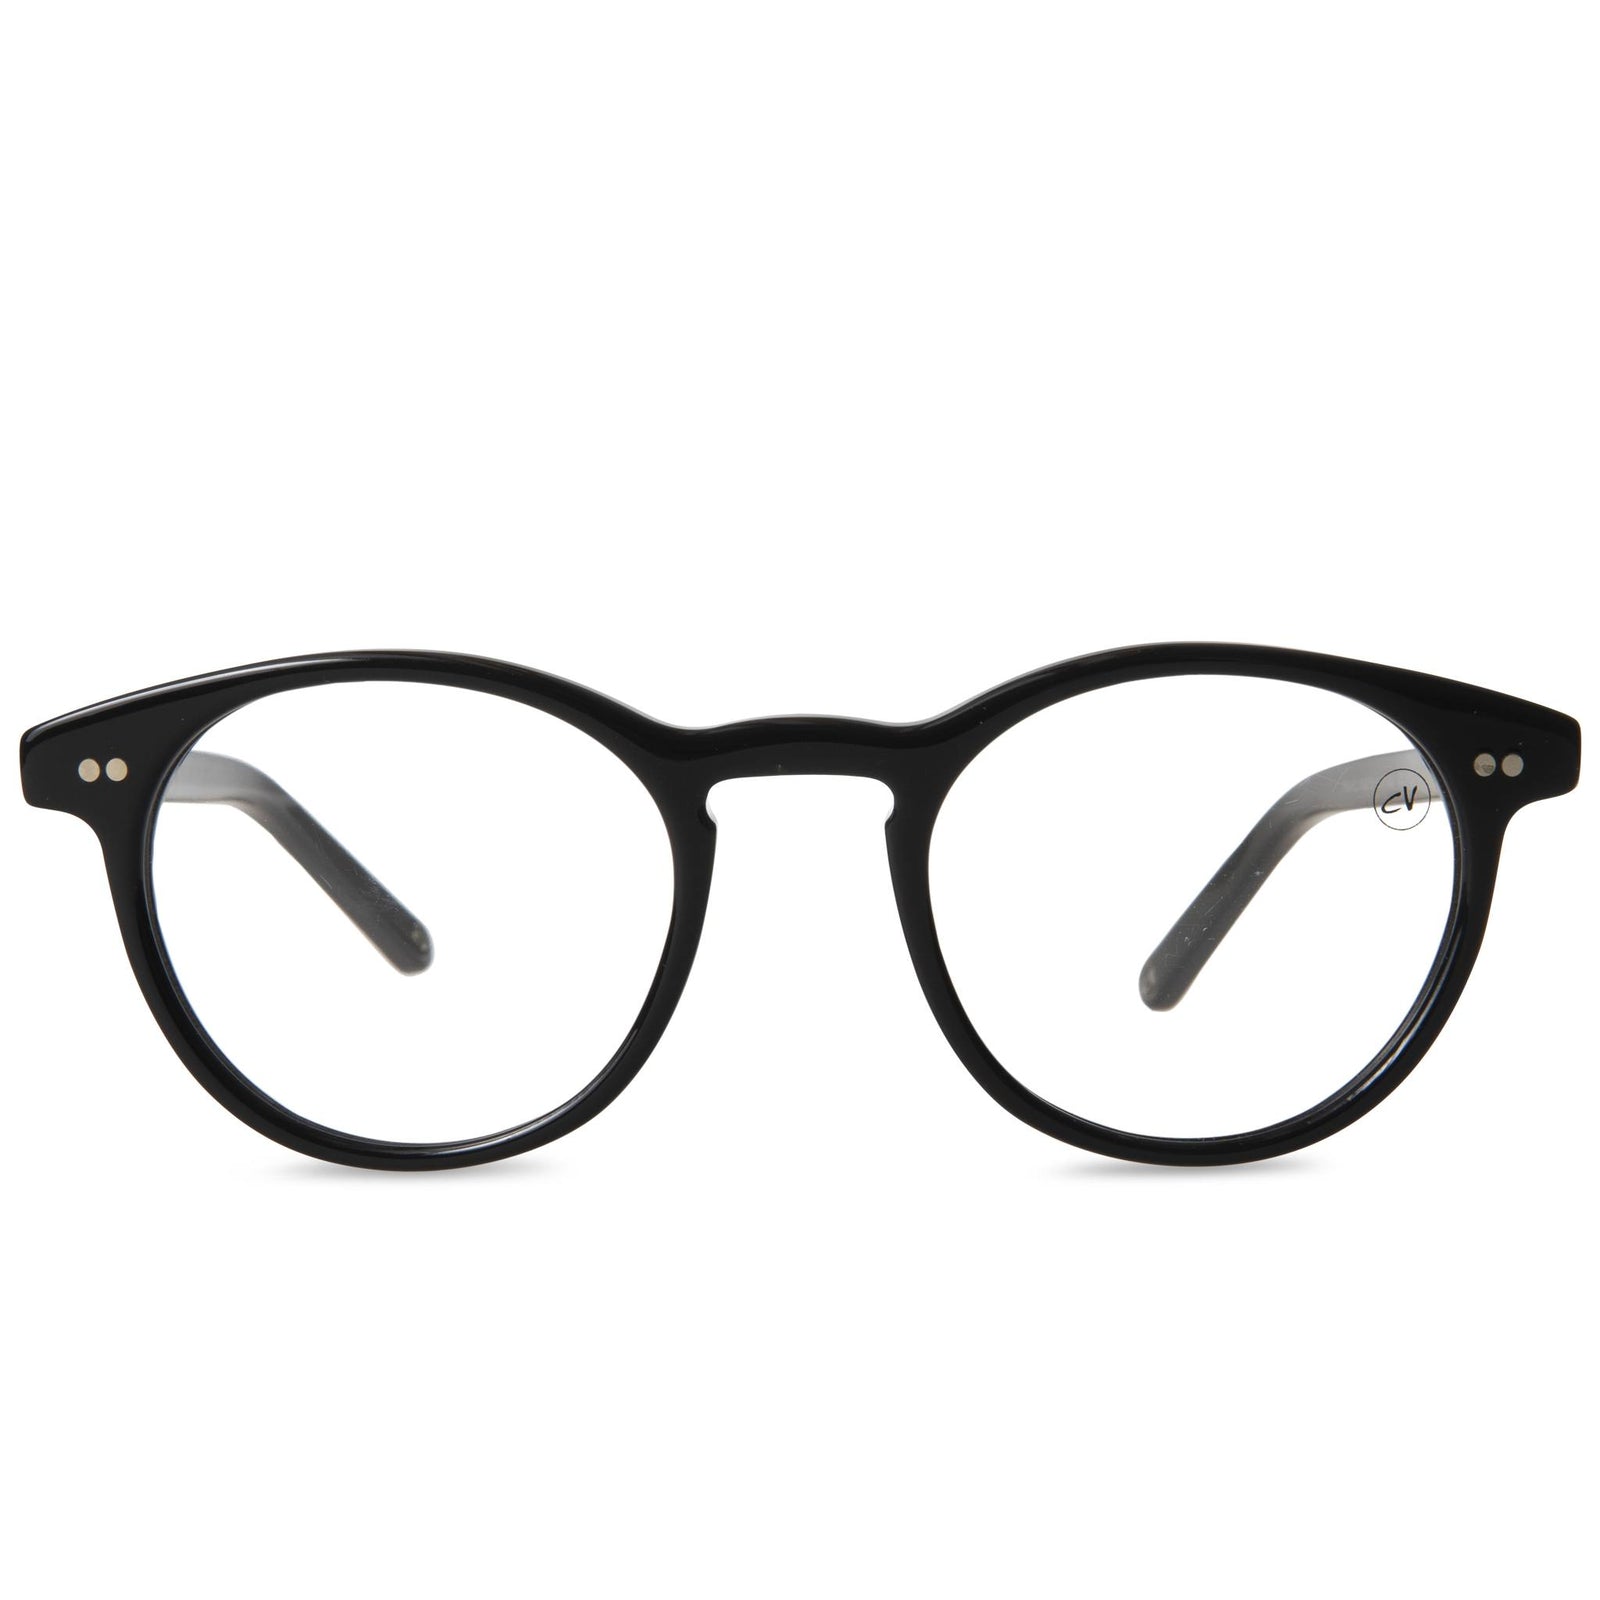 How to buy the best glasses for oval face shape?